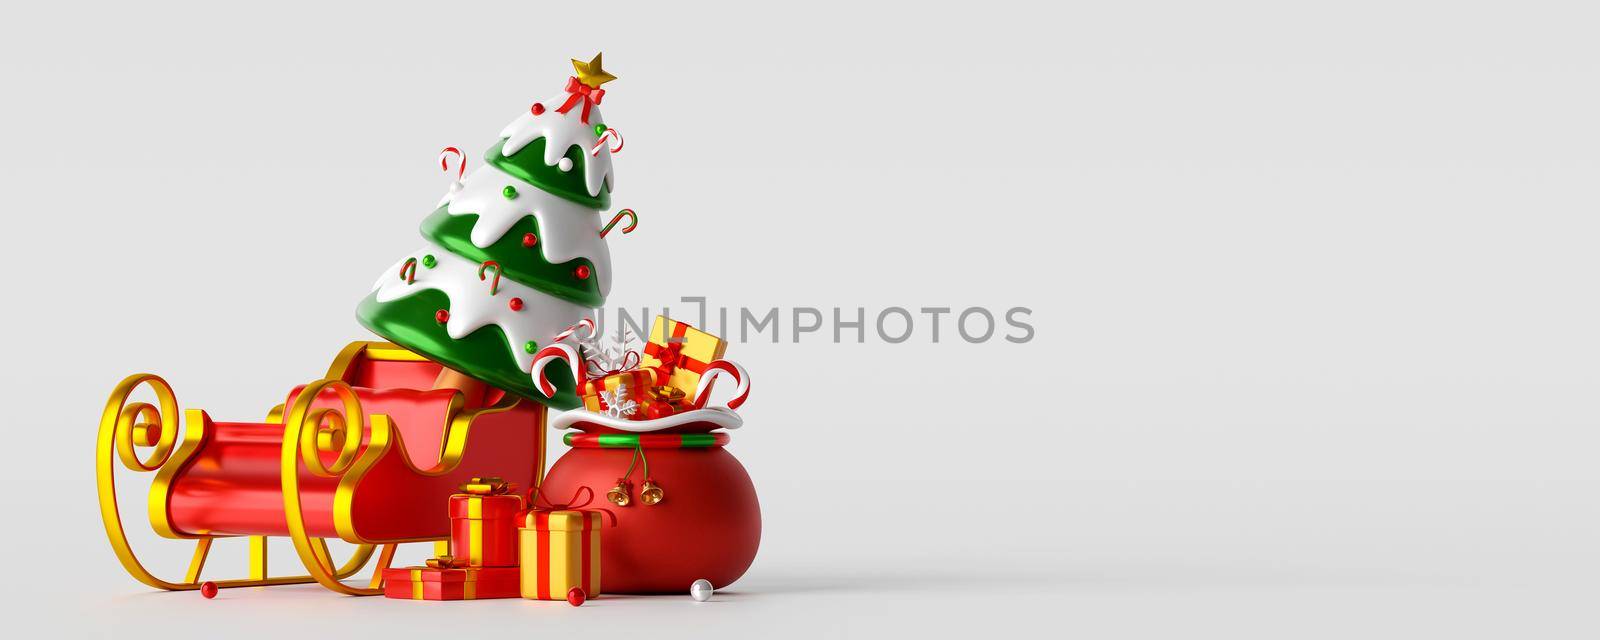 Christmas banner of Christmas tree on a sleigh with Christmas bag, 3d illustration by nutzchotwarut